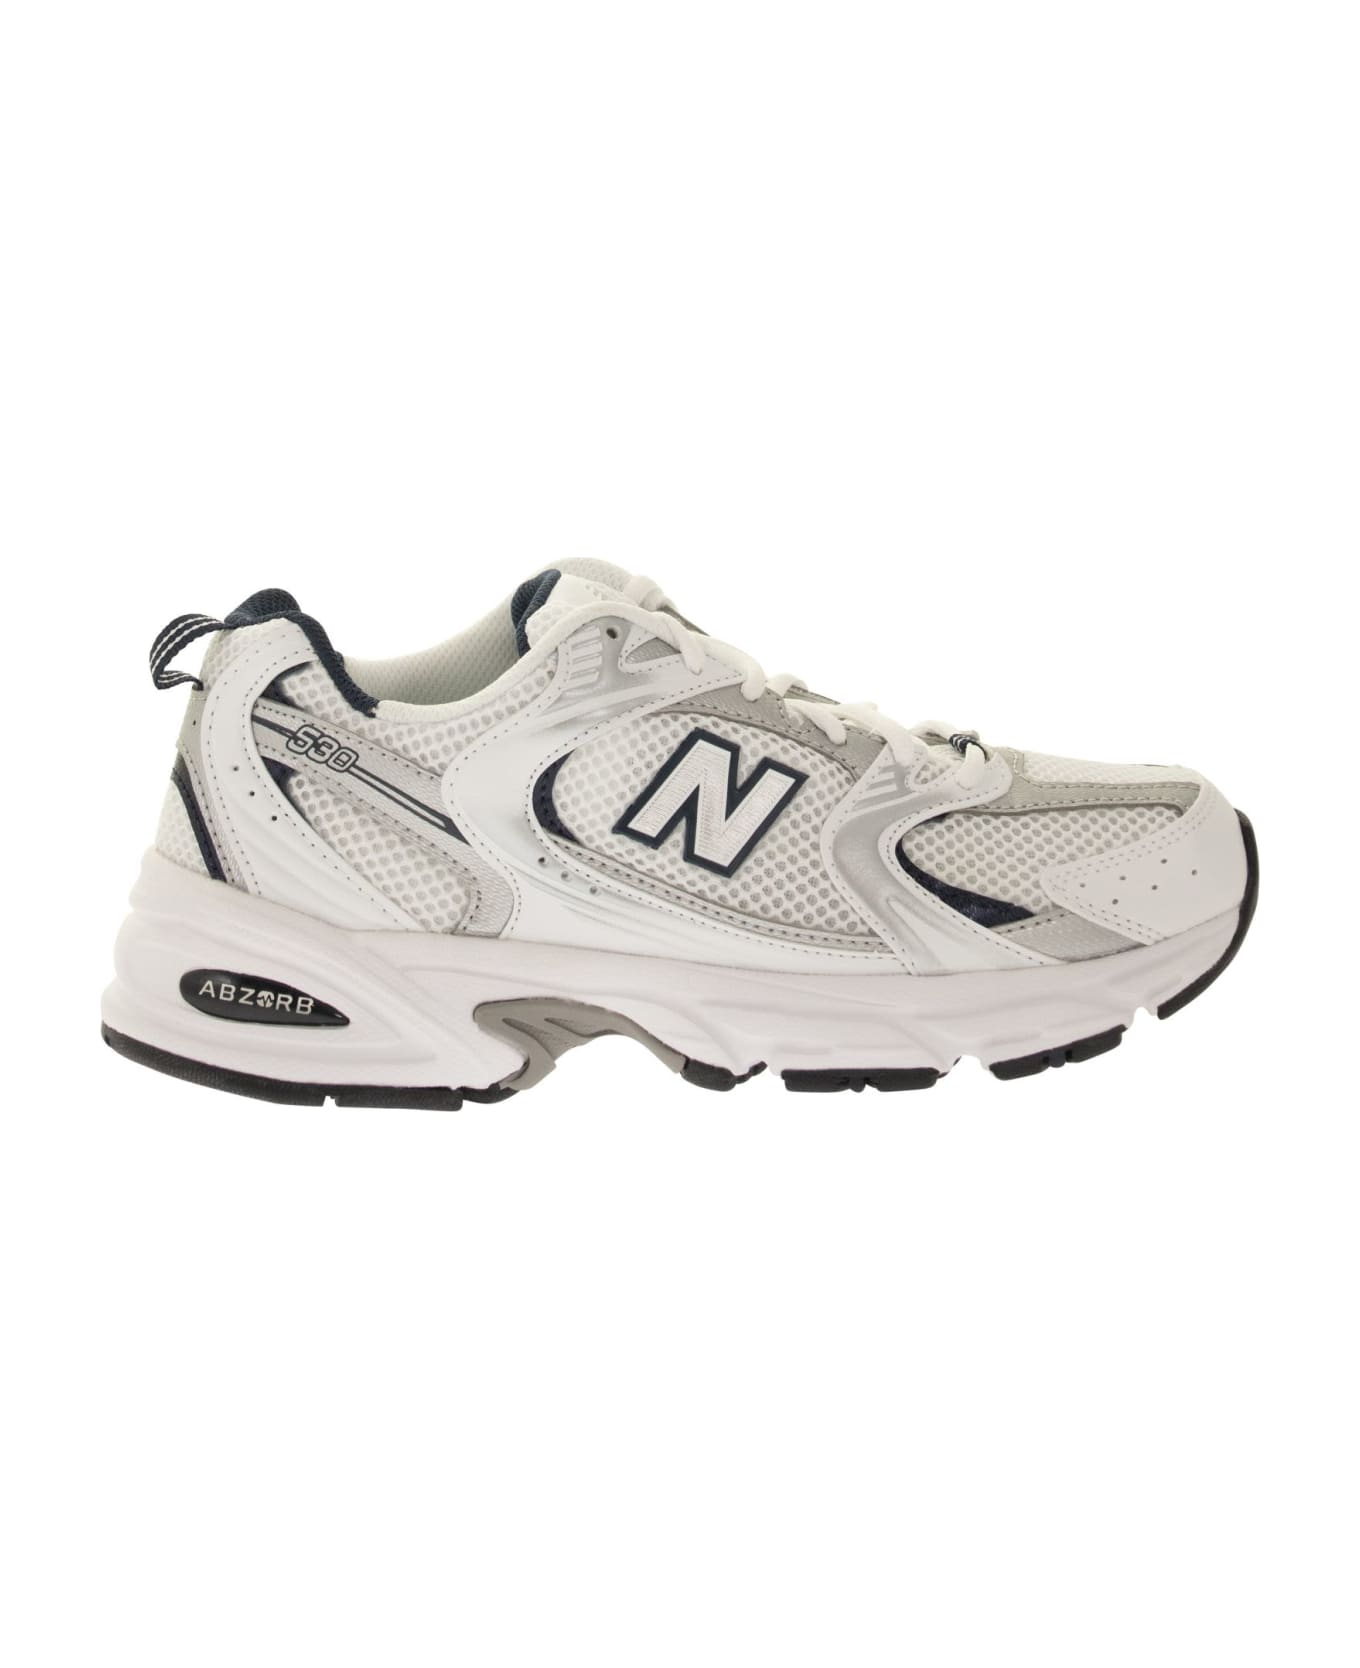 New Balance 530 - Sneakers Lifestyle - White スニーカー